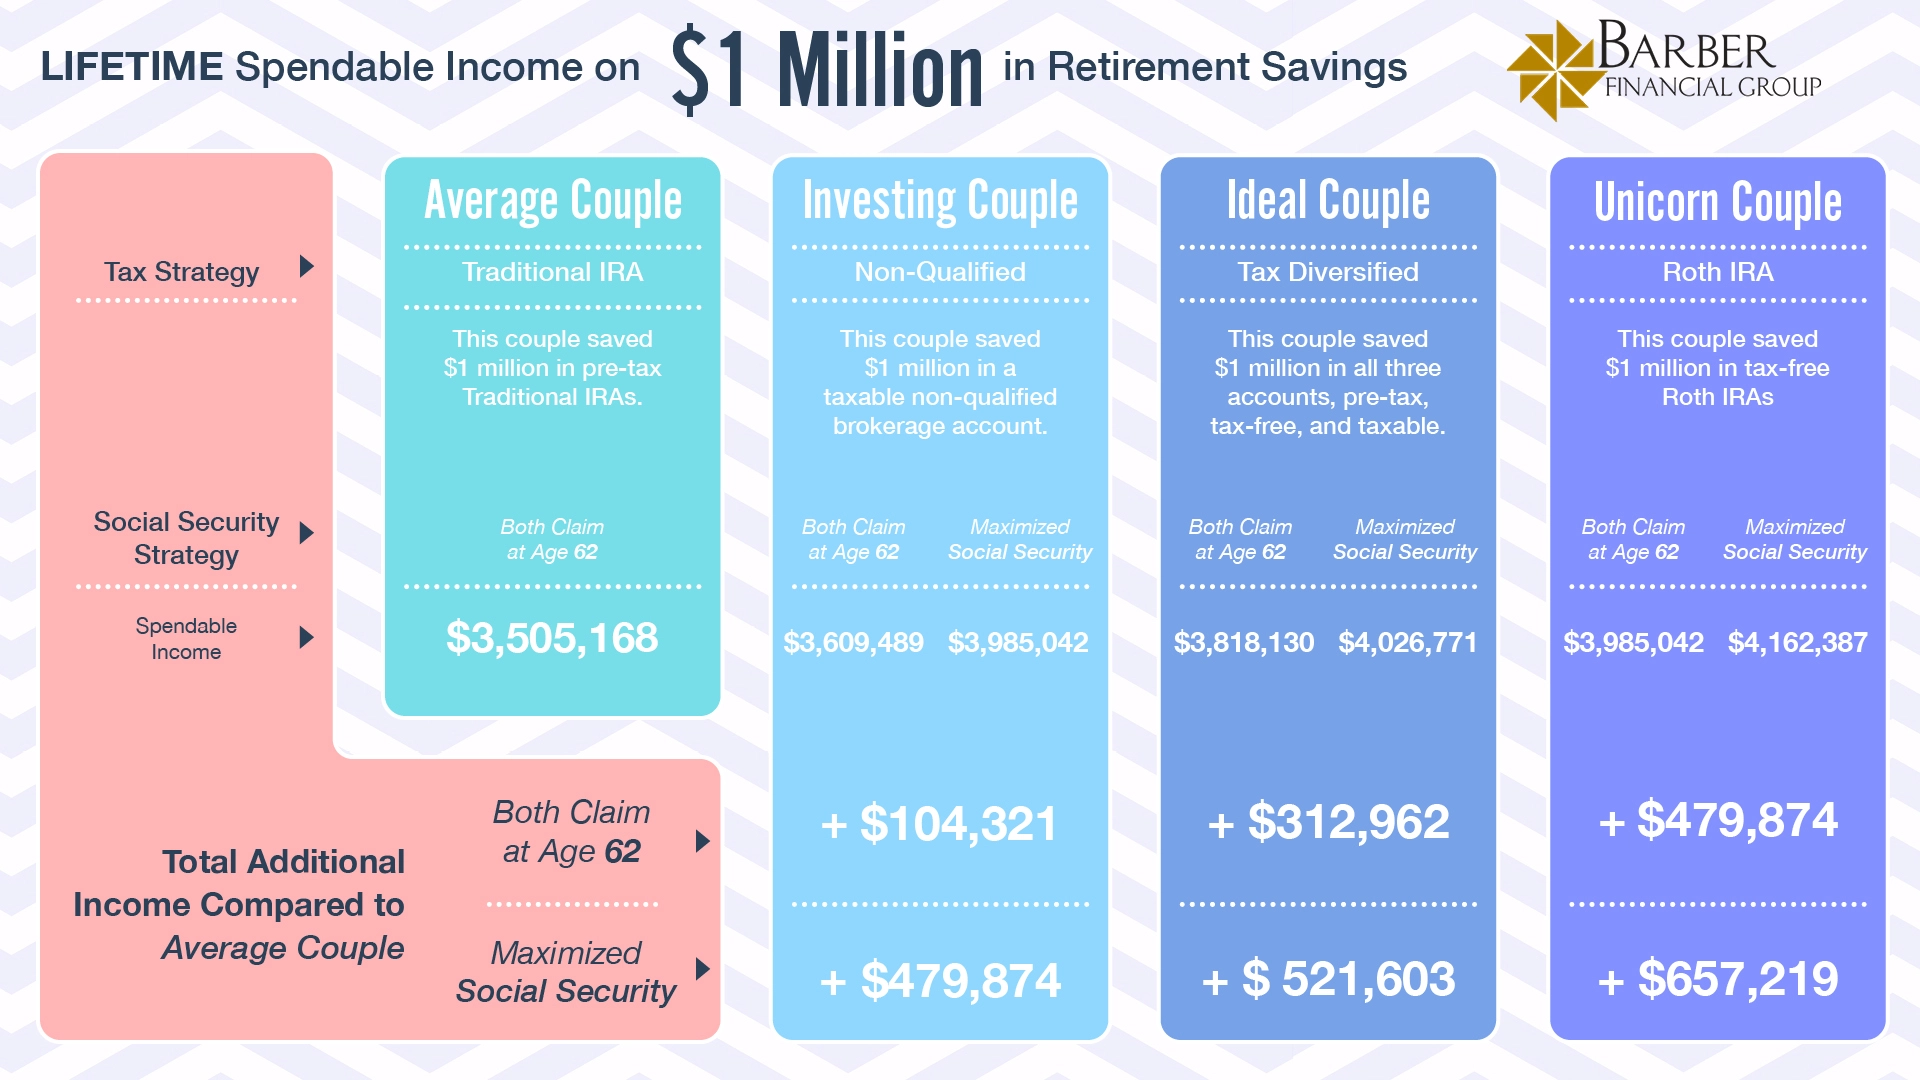 Retiring with $1 Million - Lifetime Income All Couples